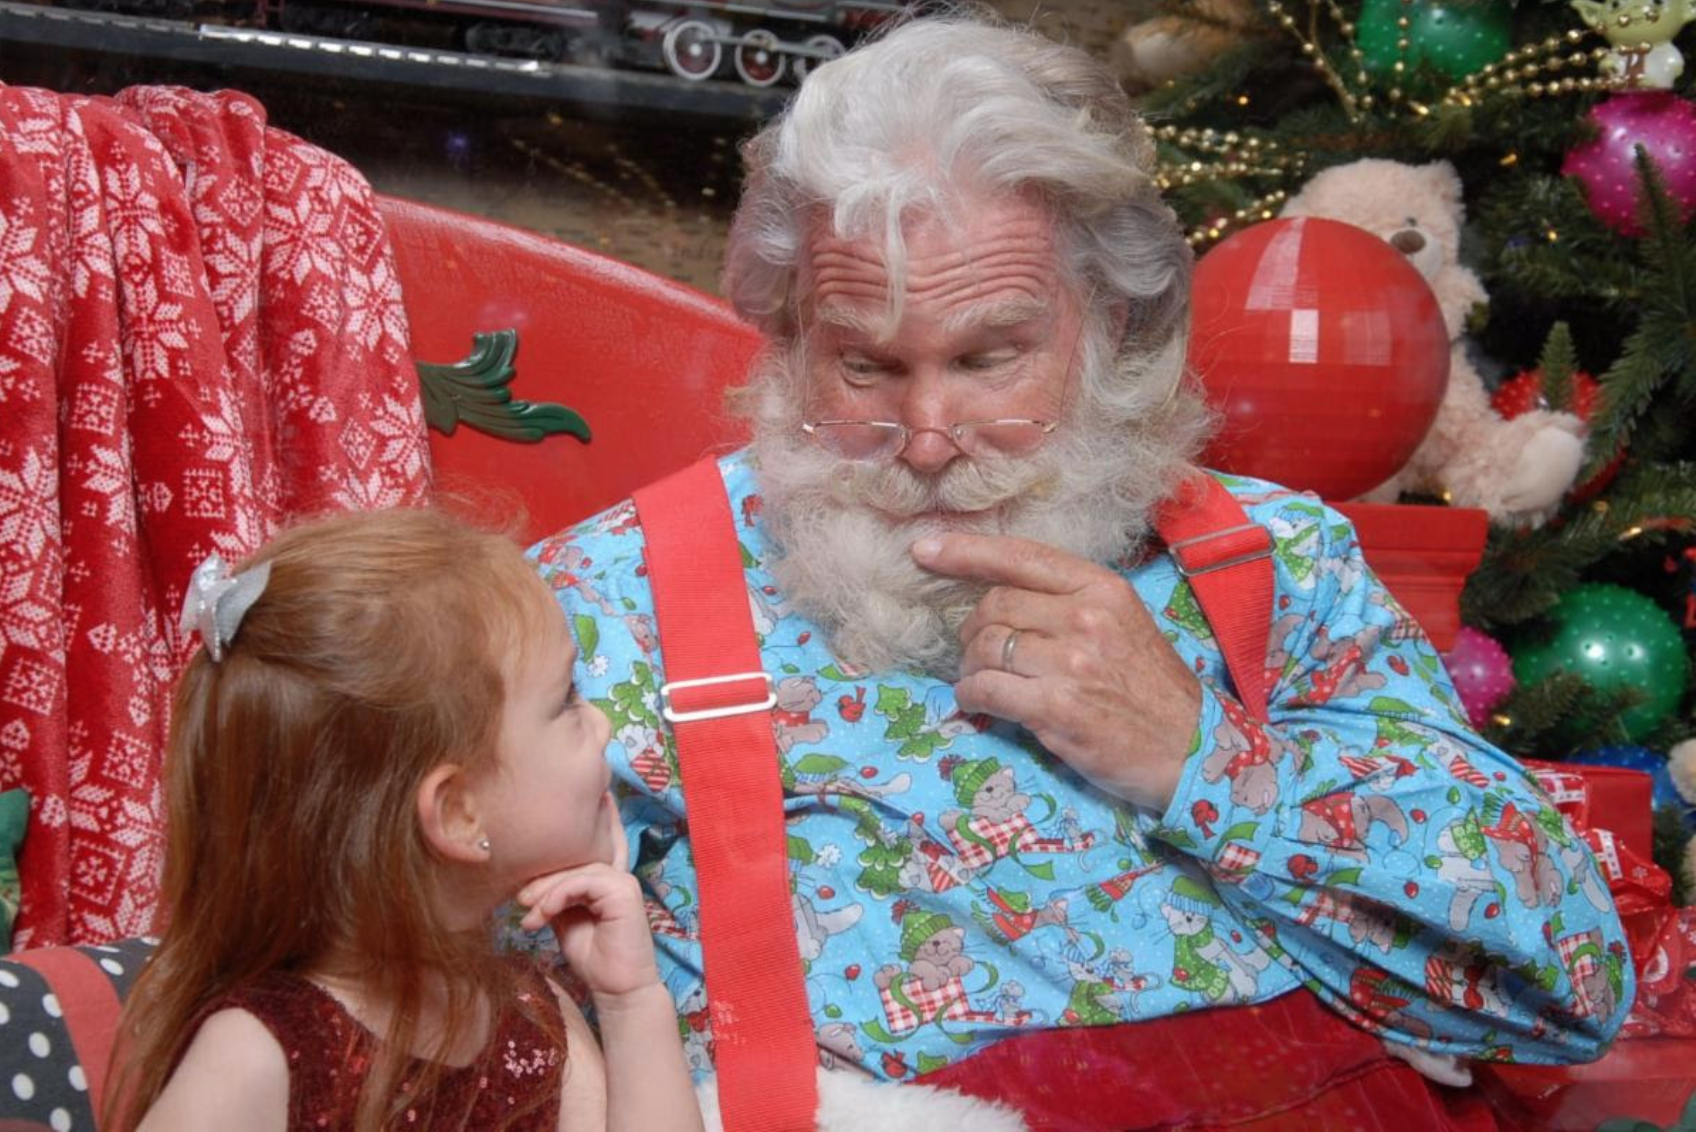 Meet Santa in Orlando: image of a girl taking a picture with Santa at ICON Park's The Santa Workshop Experience